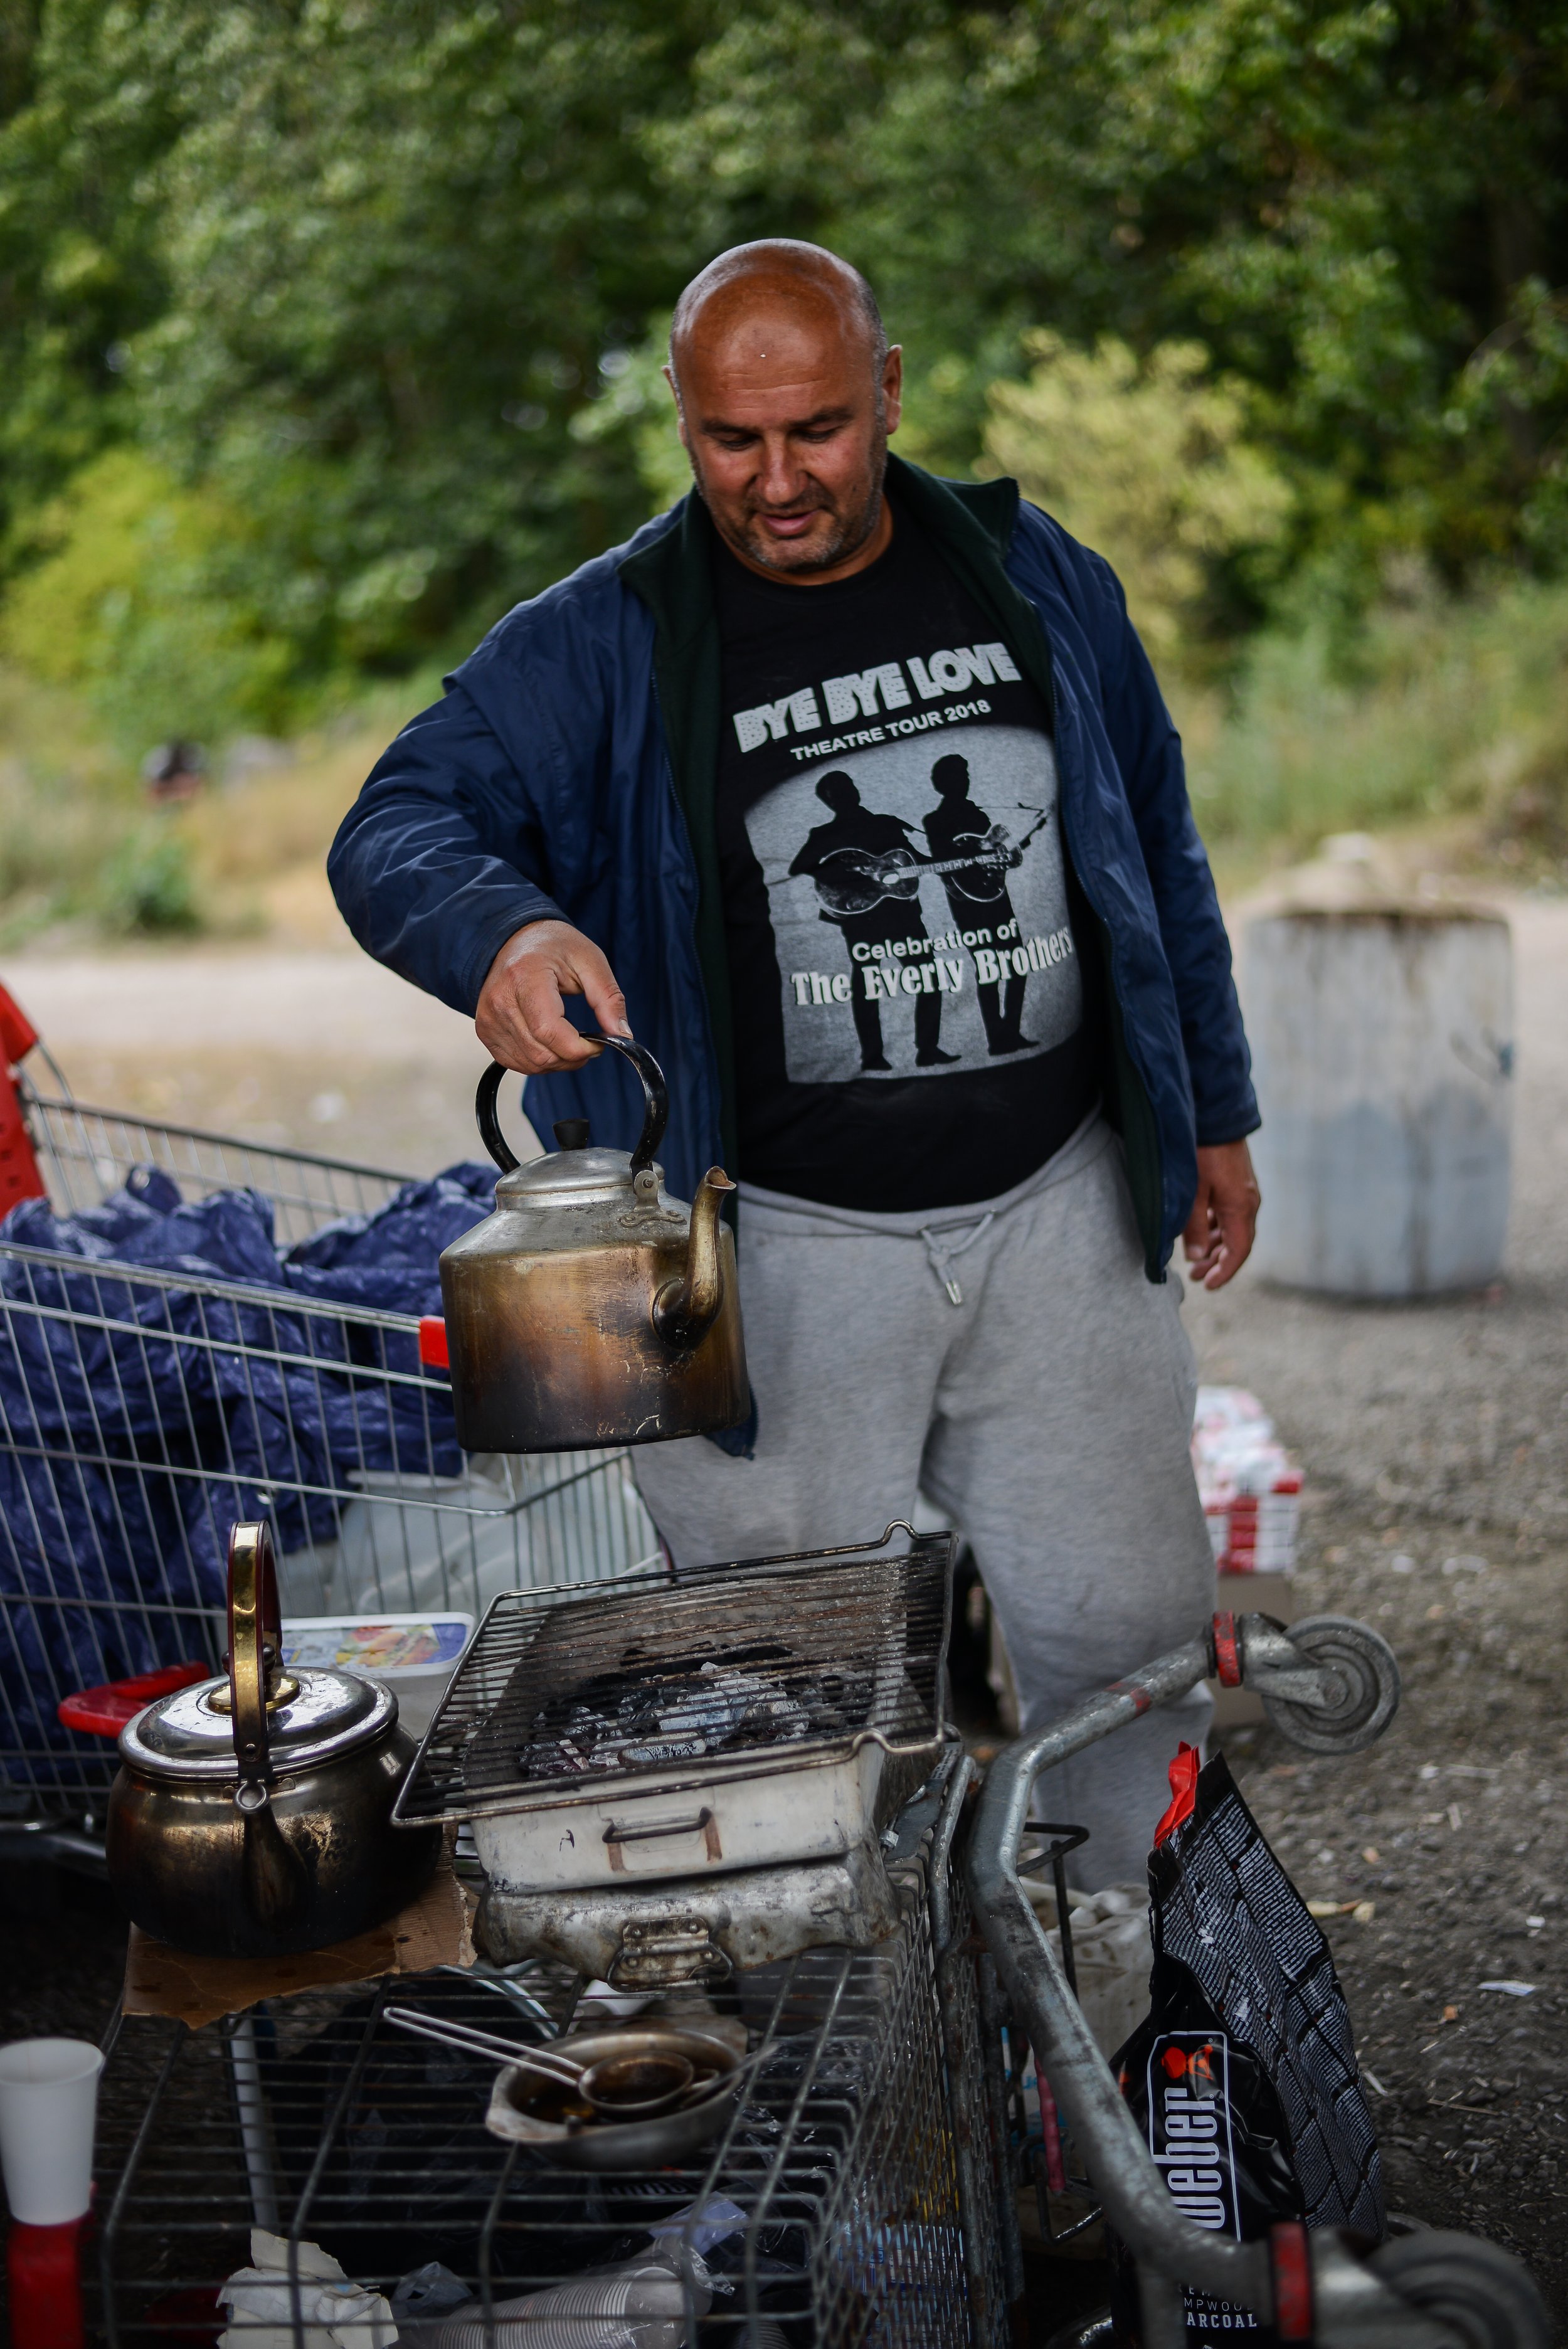  A Kurdish man makes hot water for coffee on his make-shift stove in Dunkirk. I first saw him praying outside his tent which was beneath a bridge, next to railway tracks. He was smiley. 